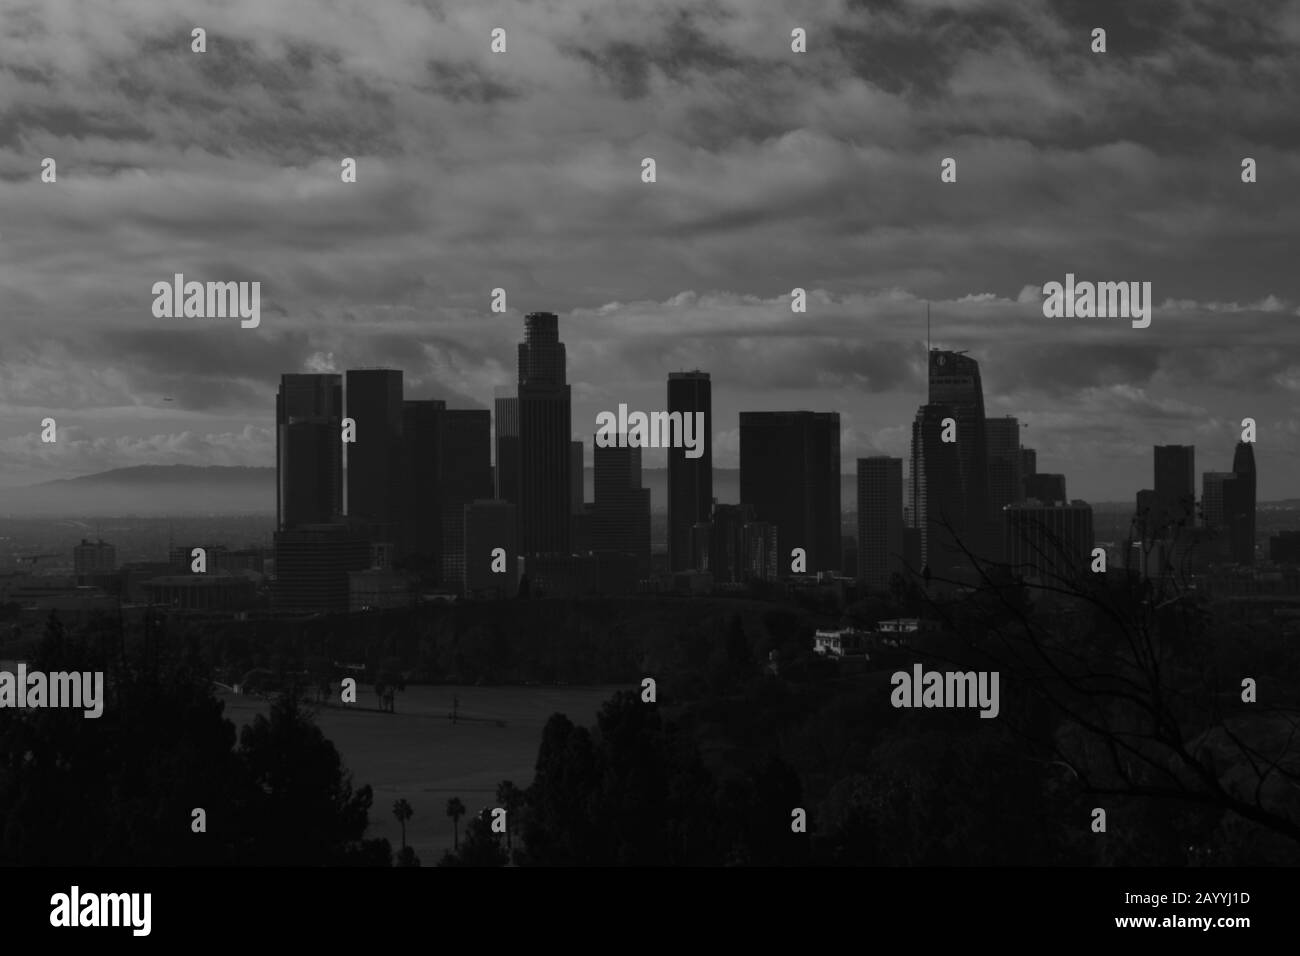 Iconic Los Angles Skyline Against Cloudy Sky In Black And White Stock Photo